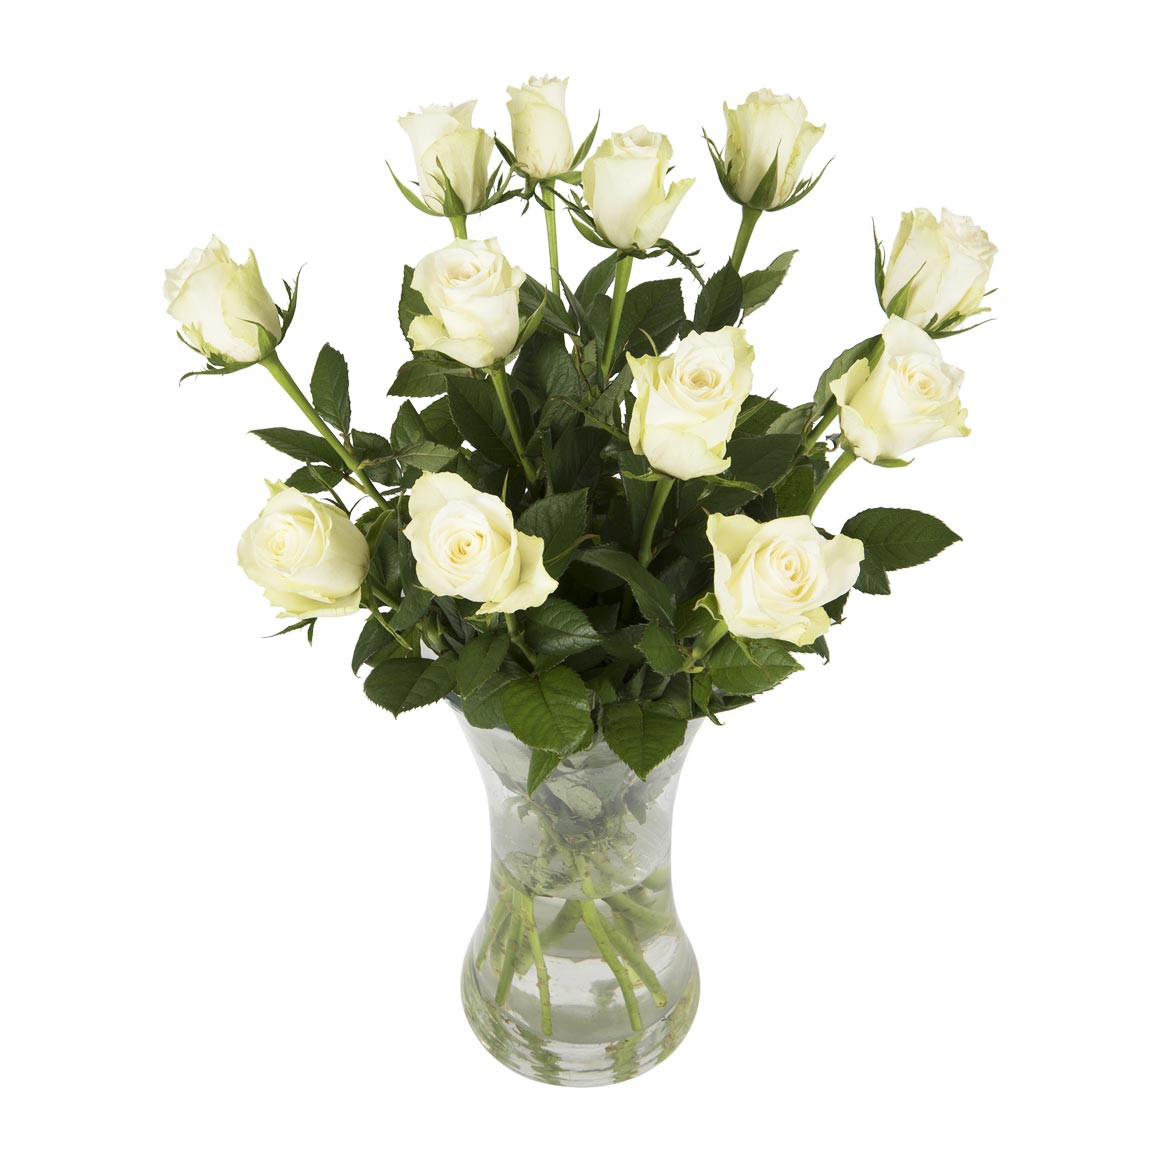 28 Trendy 19.99 Flowers with Free Vase 2024 free download 19 99 flowers with free vase of woolworths co za food home clothing general merchandise in woolworths co za food home clothing general merchandise available online